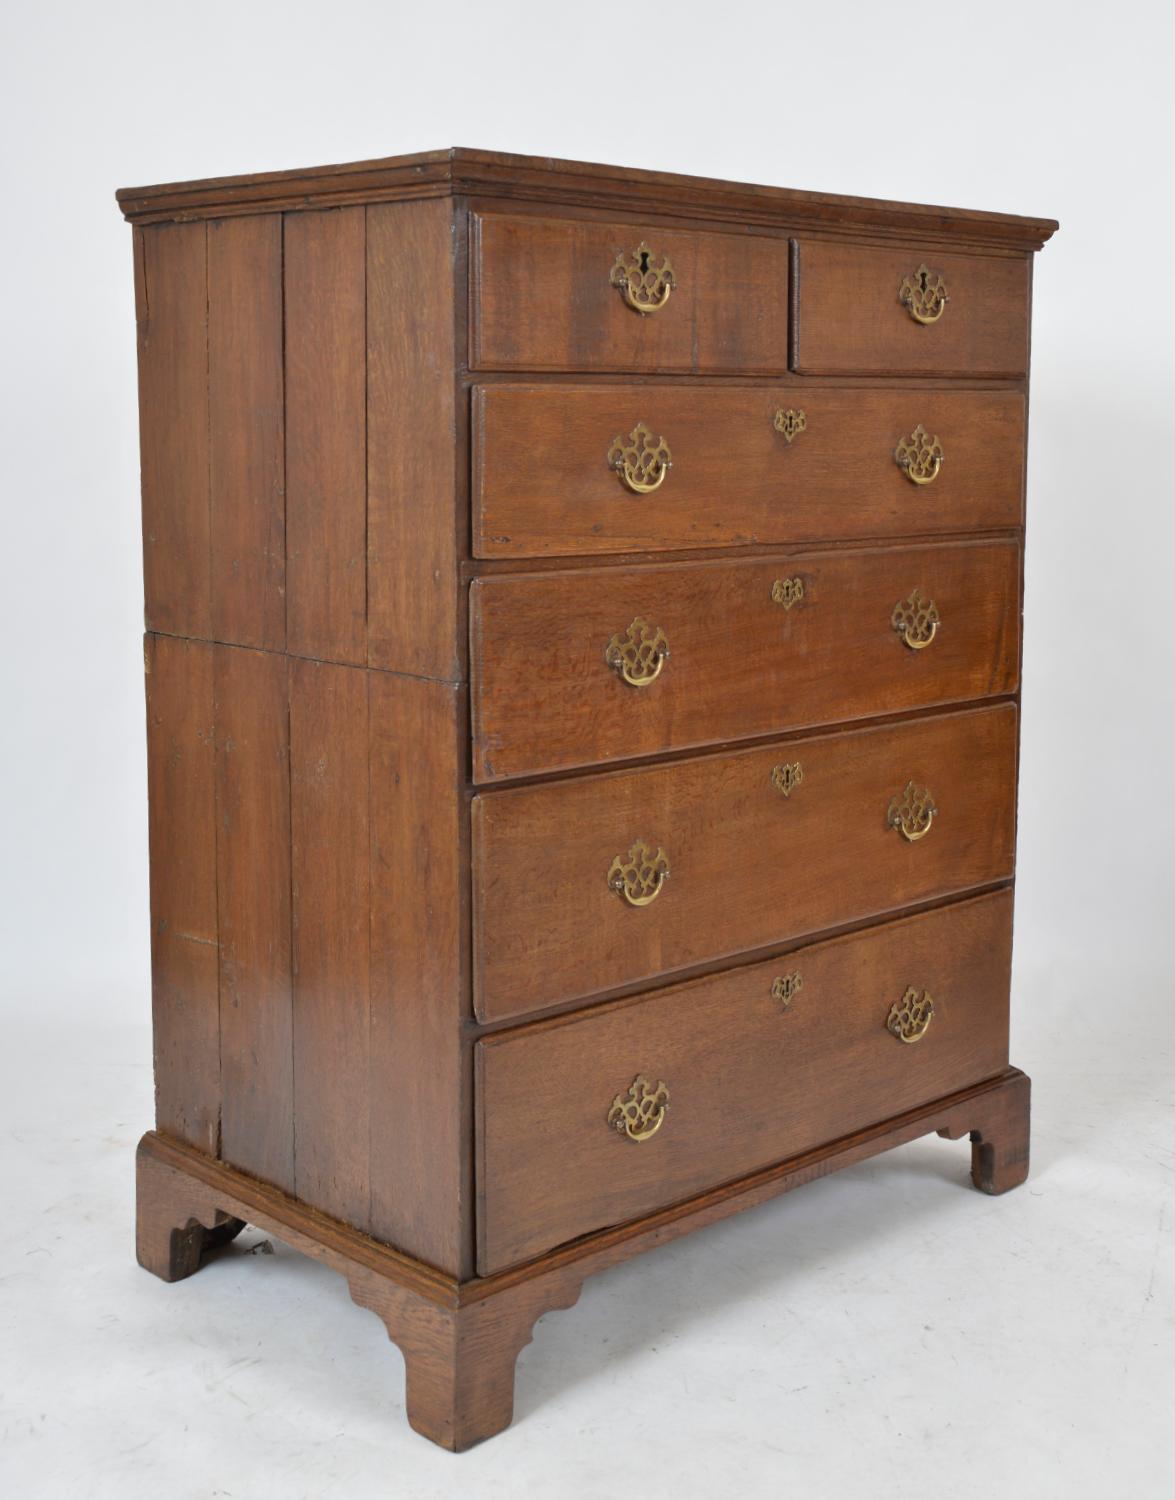 A very tall and highly attractive 18th-century Georgian oak chest of two over four graduated drawers, with beautifully figured oak, brass handles, and escutcheons, raised on bracket feet. The four quarter sawn oak graduated drawers, run nice and